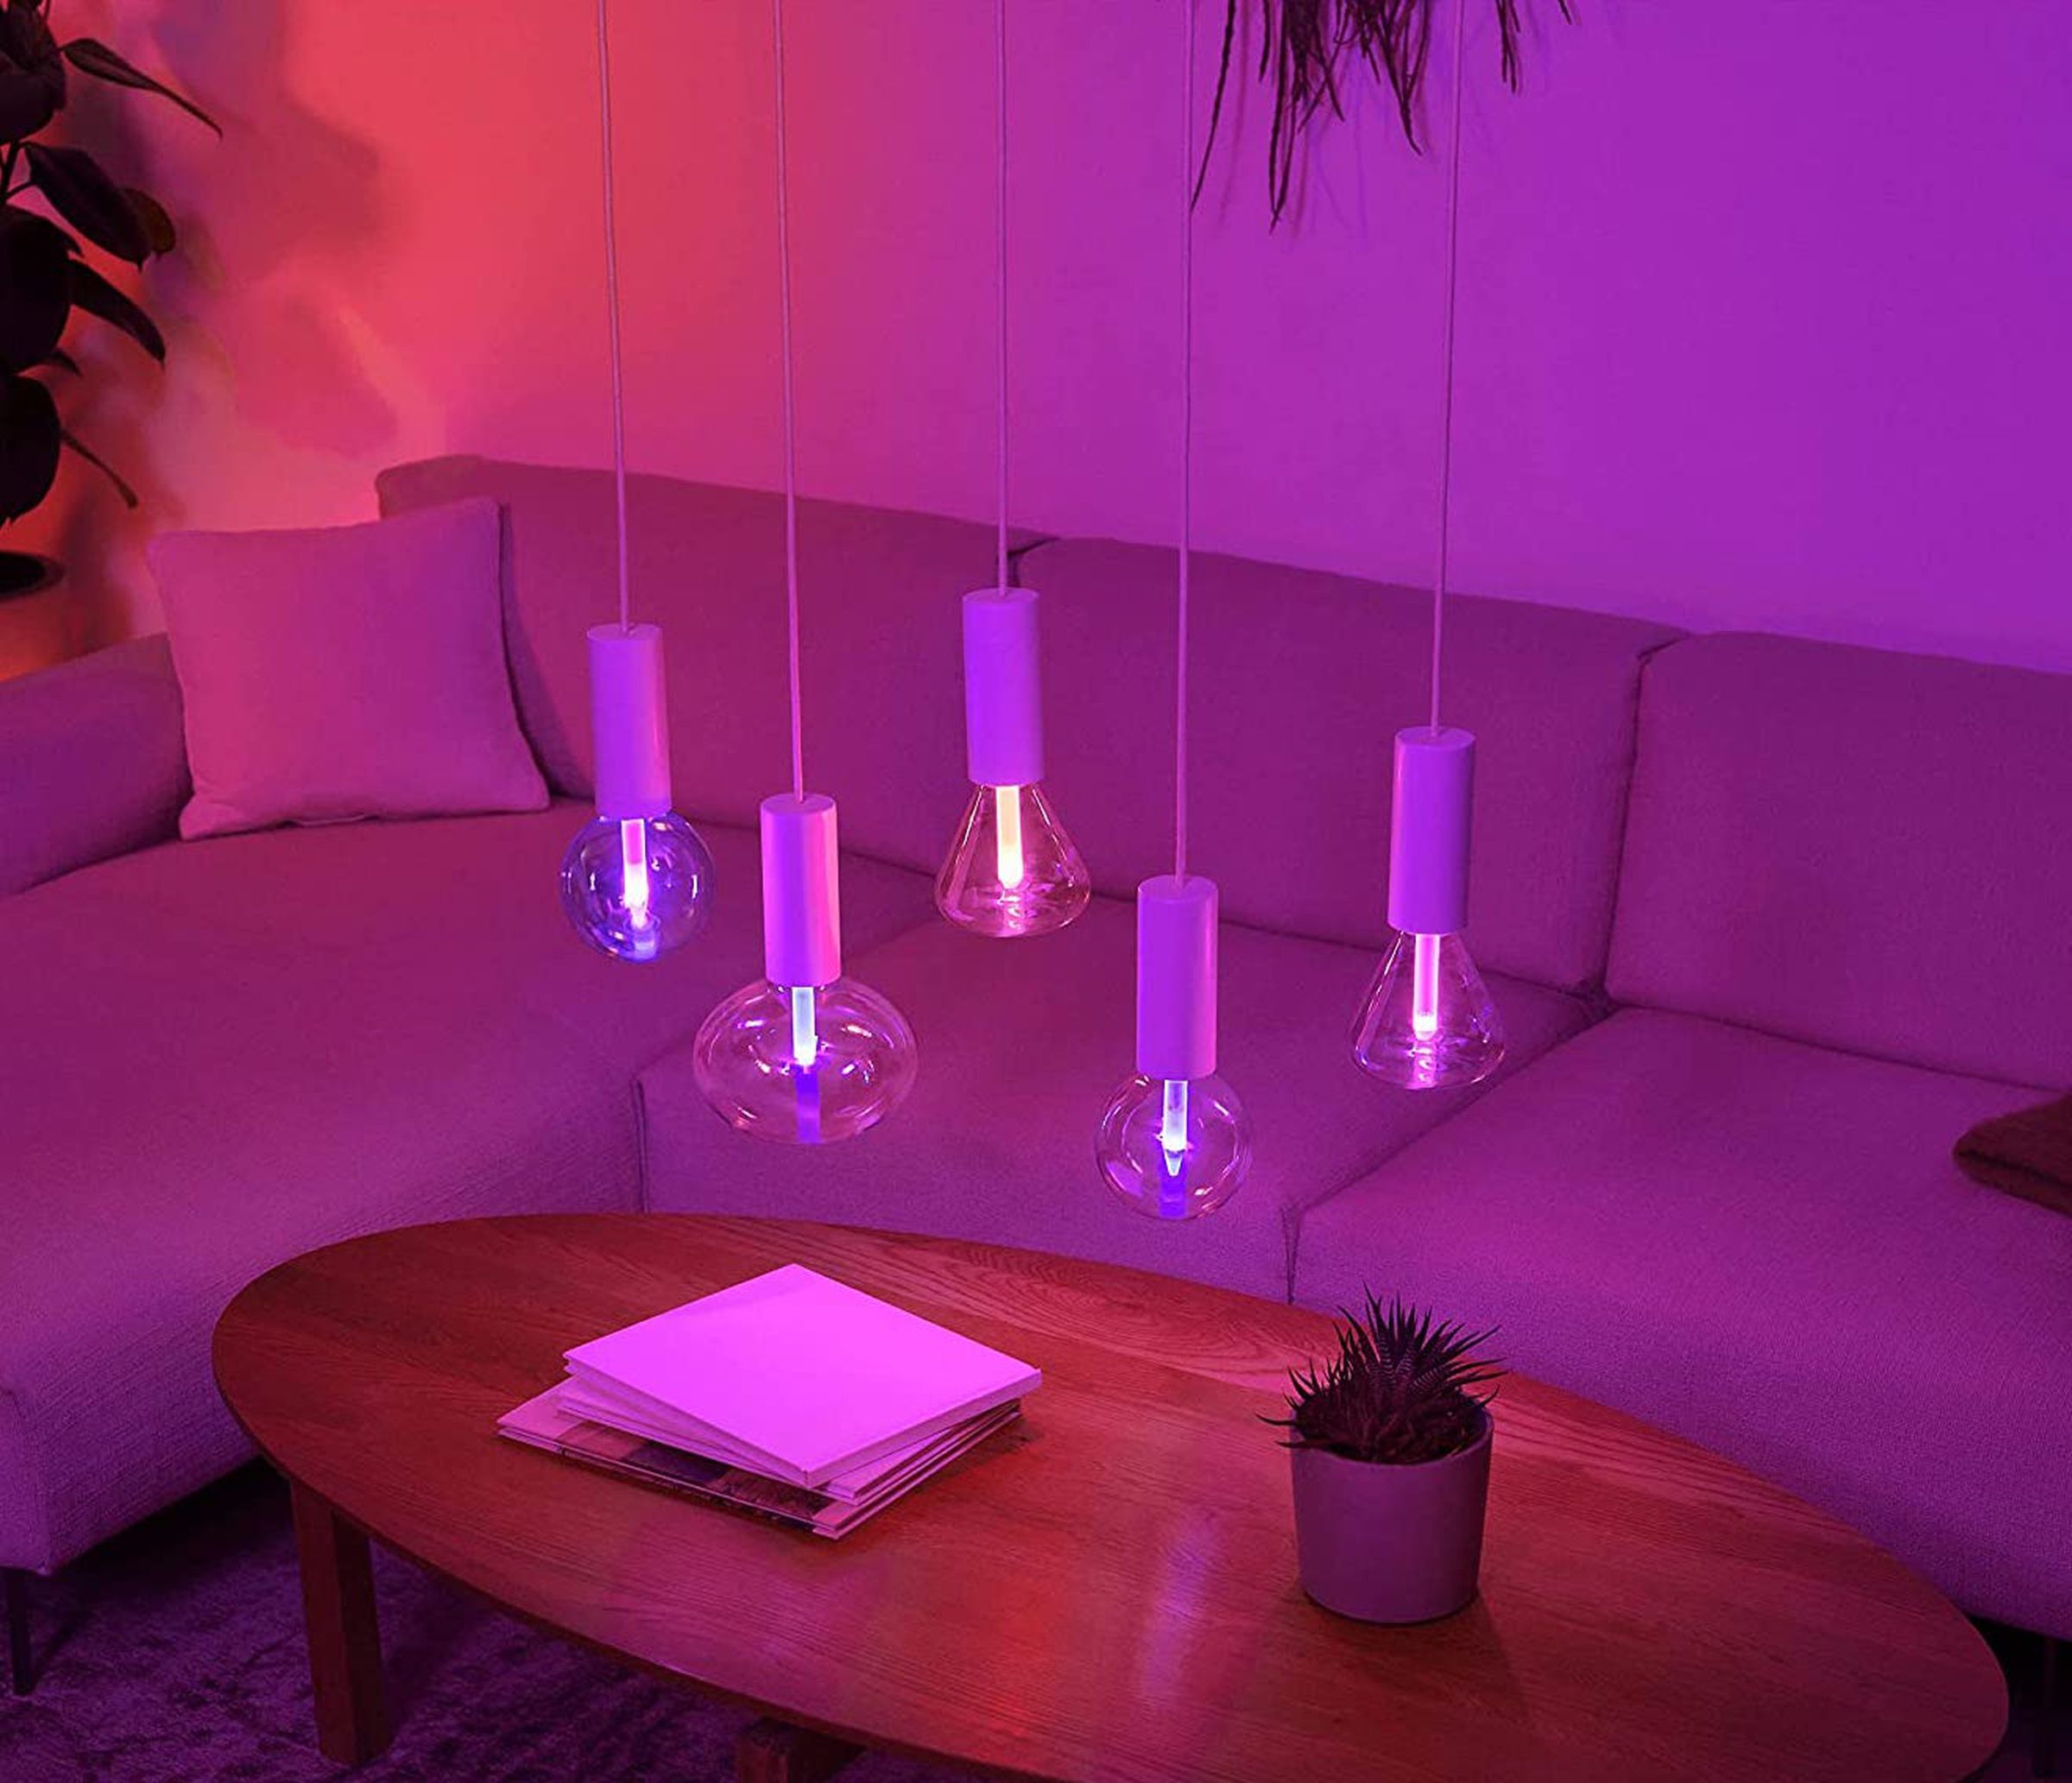 Lightguide bulbs are a new decorative smart LED lighting option from Philips Hue.